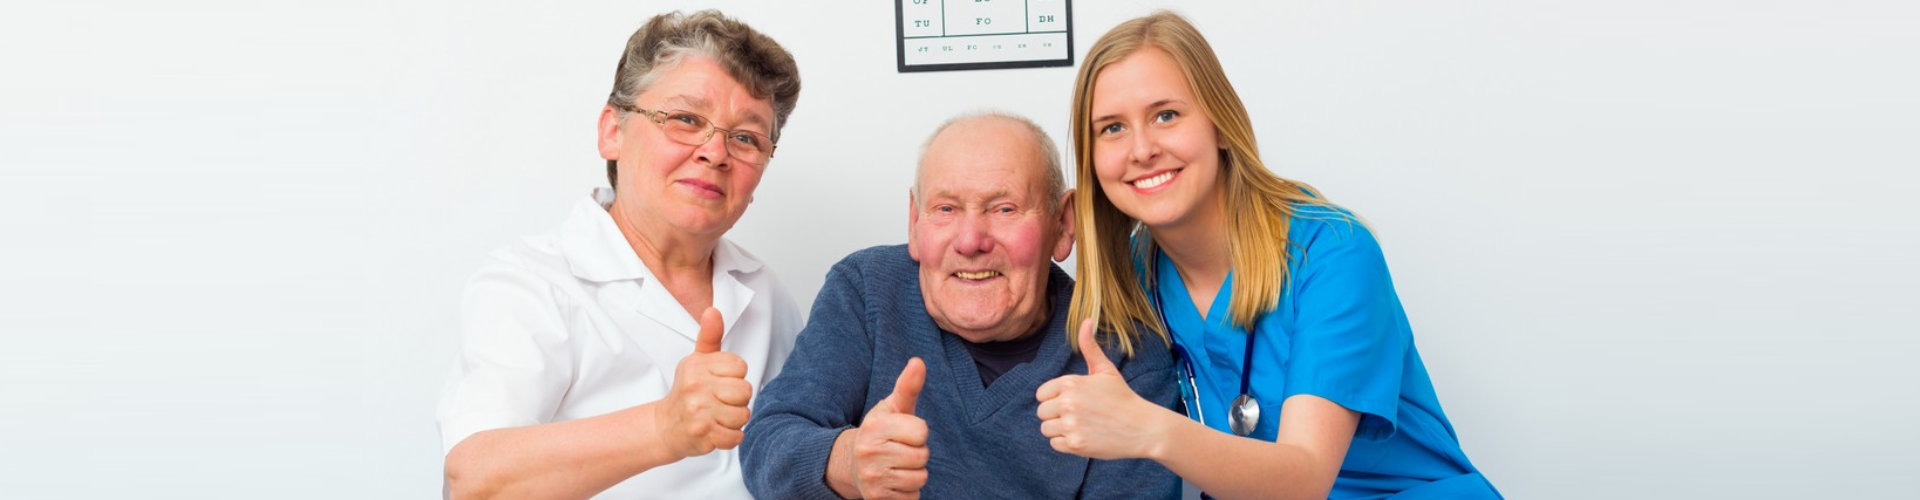 nurse and senior couple doing a thumbs up